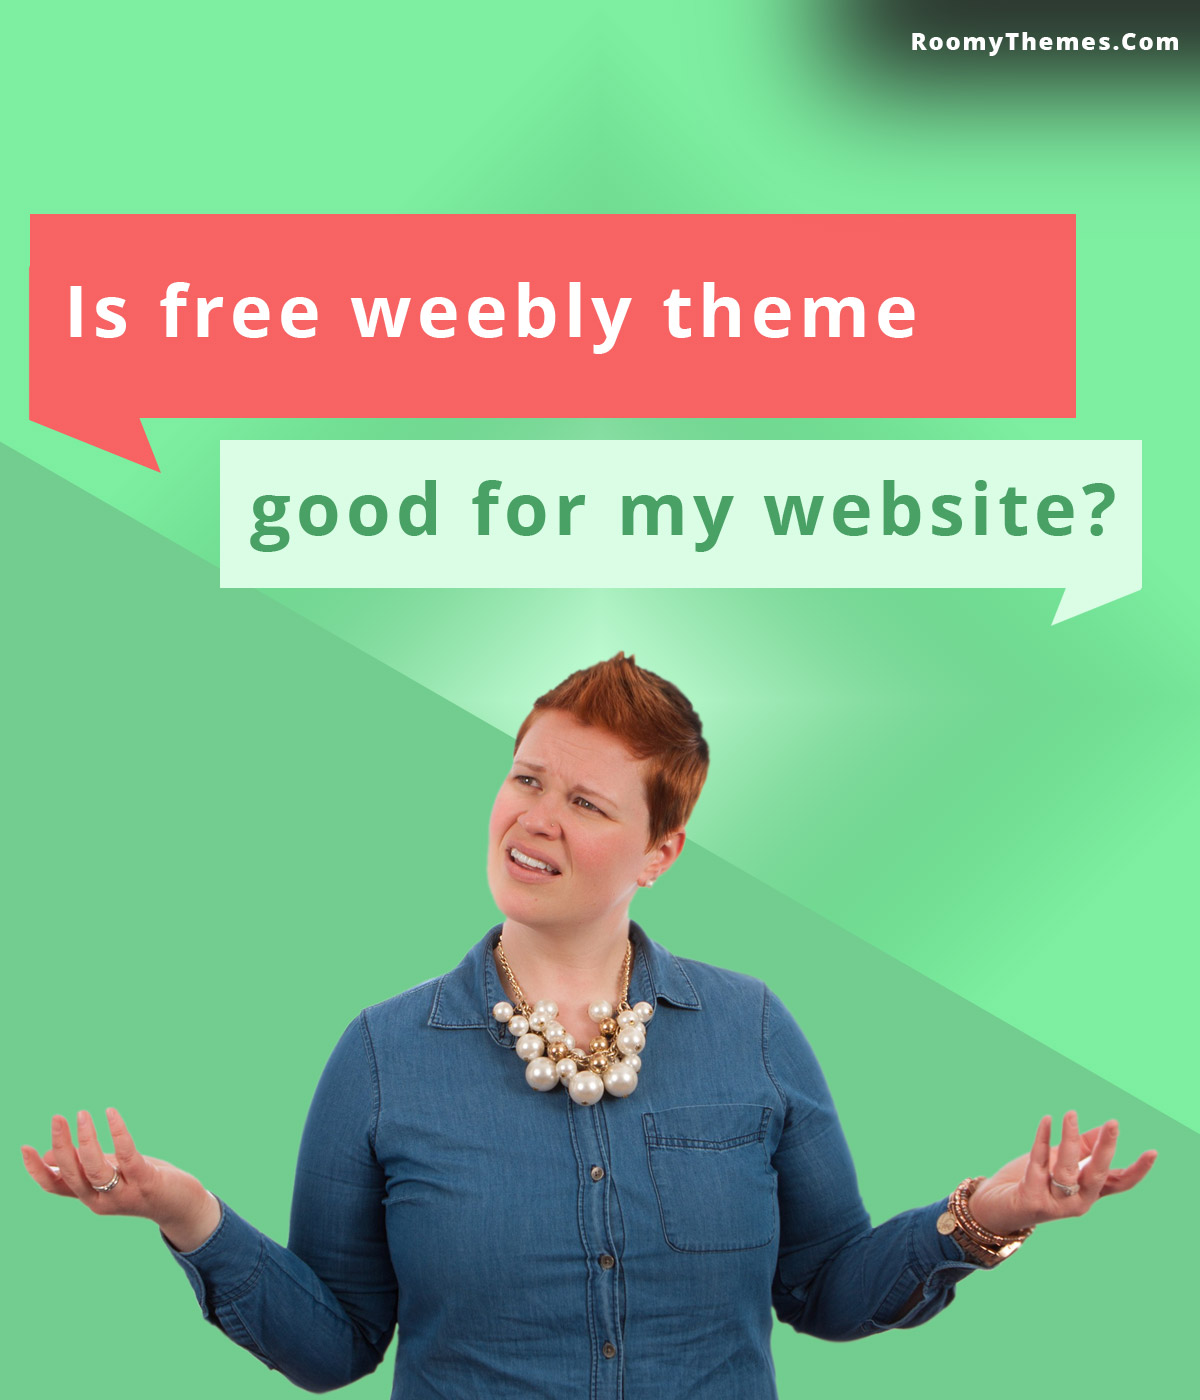 is free weebly theme good for my website?